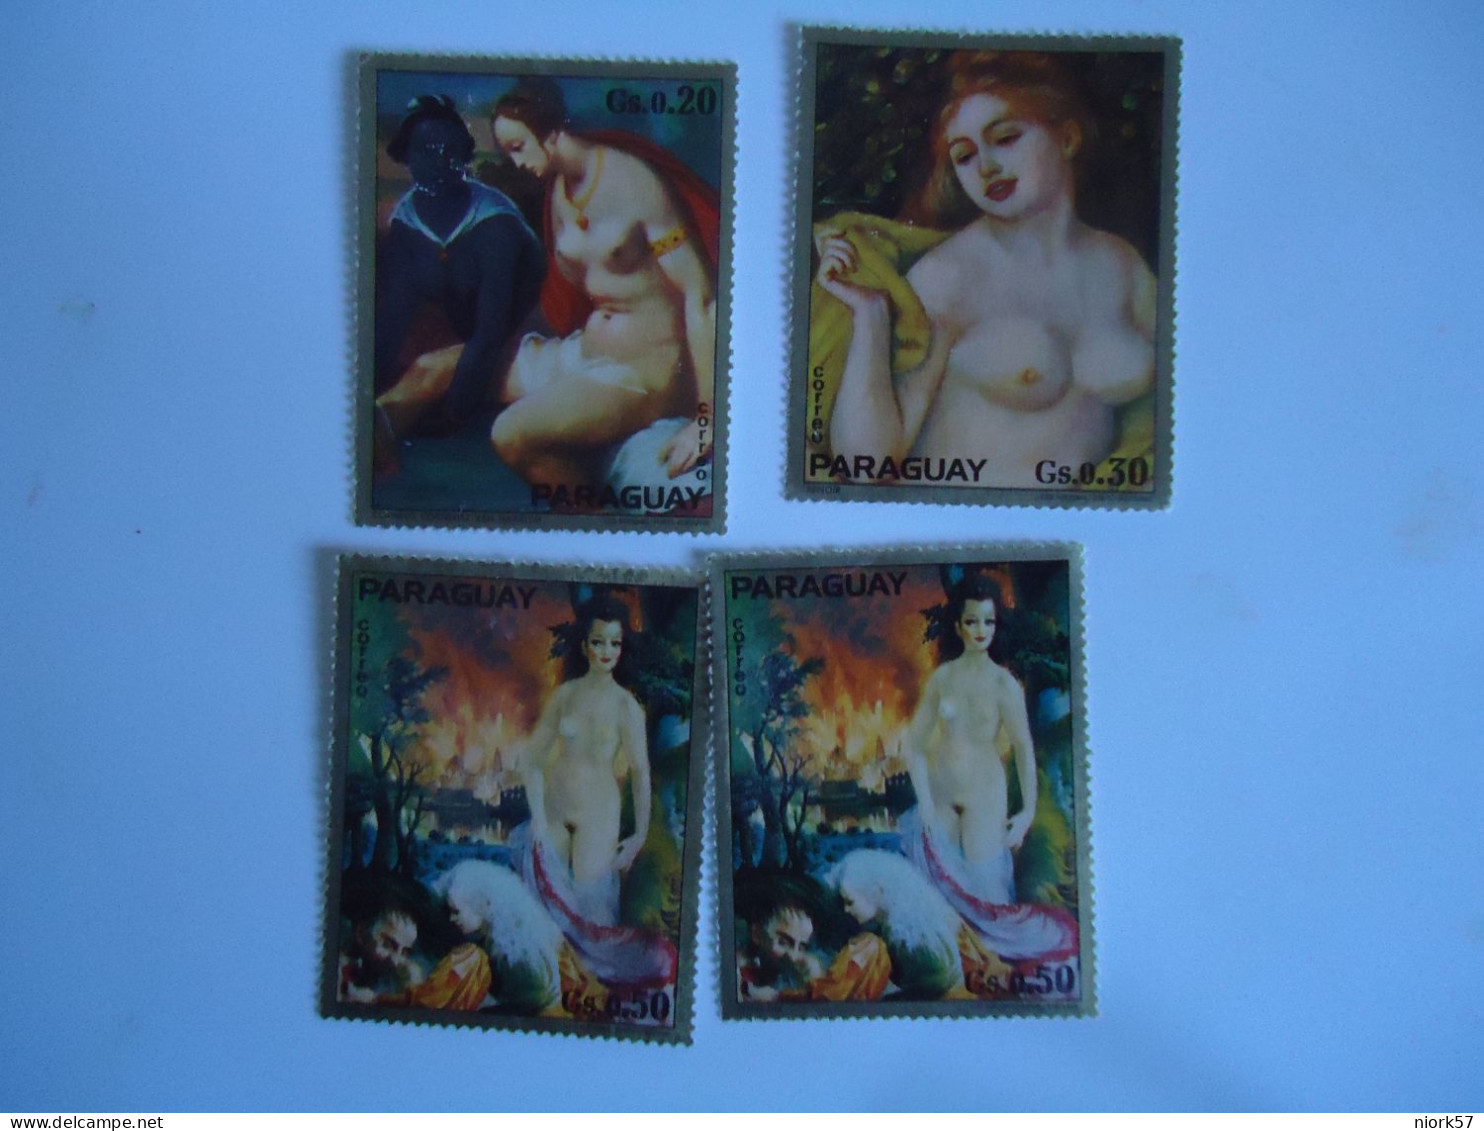 PARAGUAY  MNH 3 MLN 1 4 STAMPS  PAINTINGS NUDES - Aktmalerei